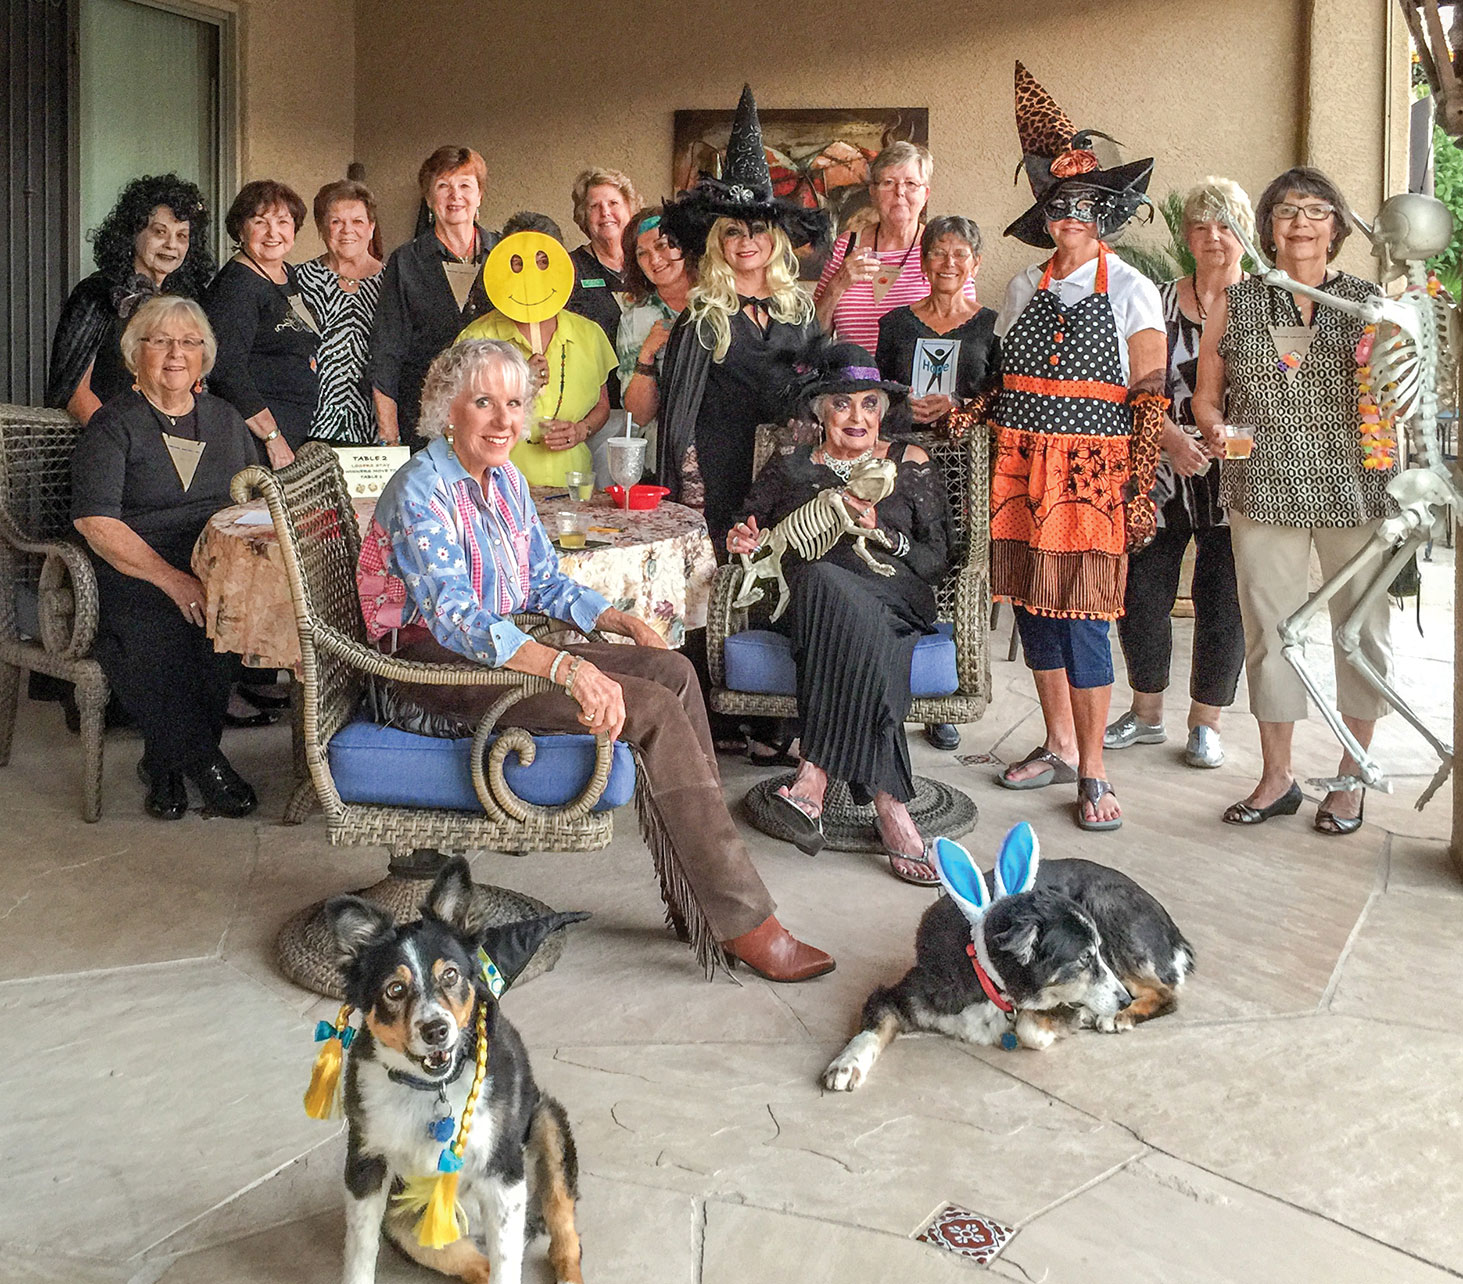 Despite many clever costumes, the ladies of Unit 21’s Bunco Group gathering just don’t look all that scary. The dogs, on the other hand, look like they would just like to go back to being man’s best friend!